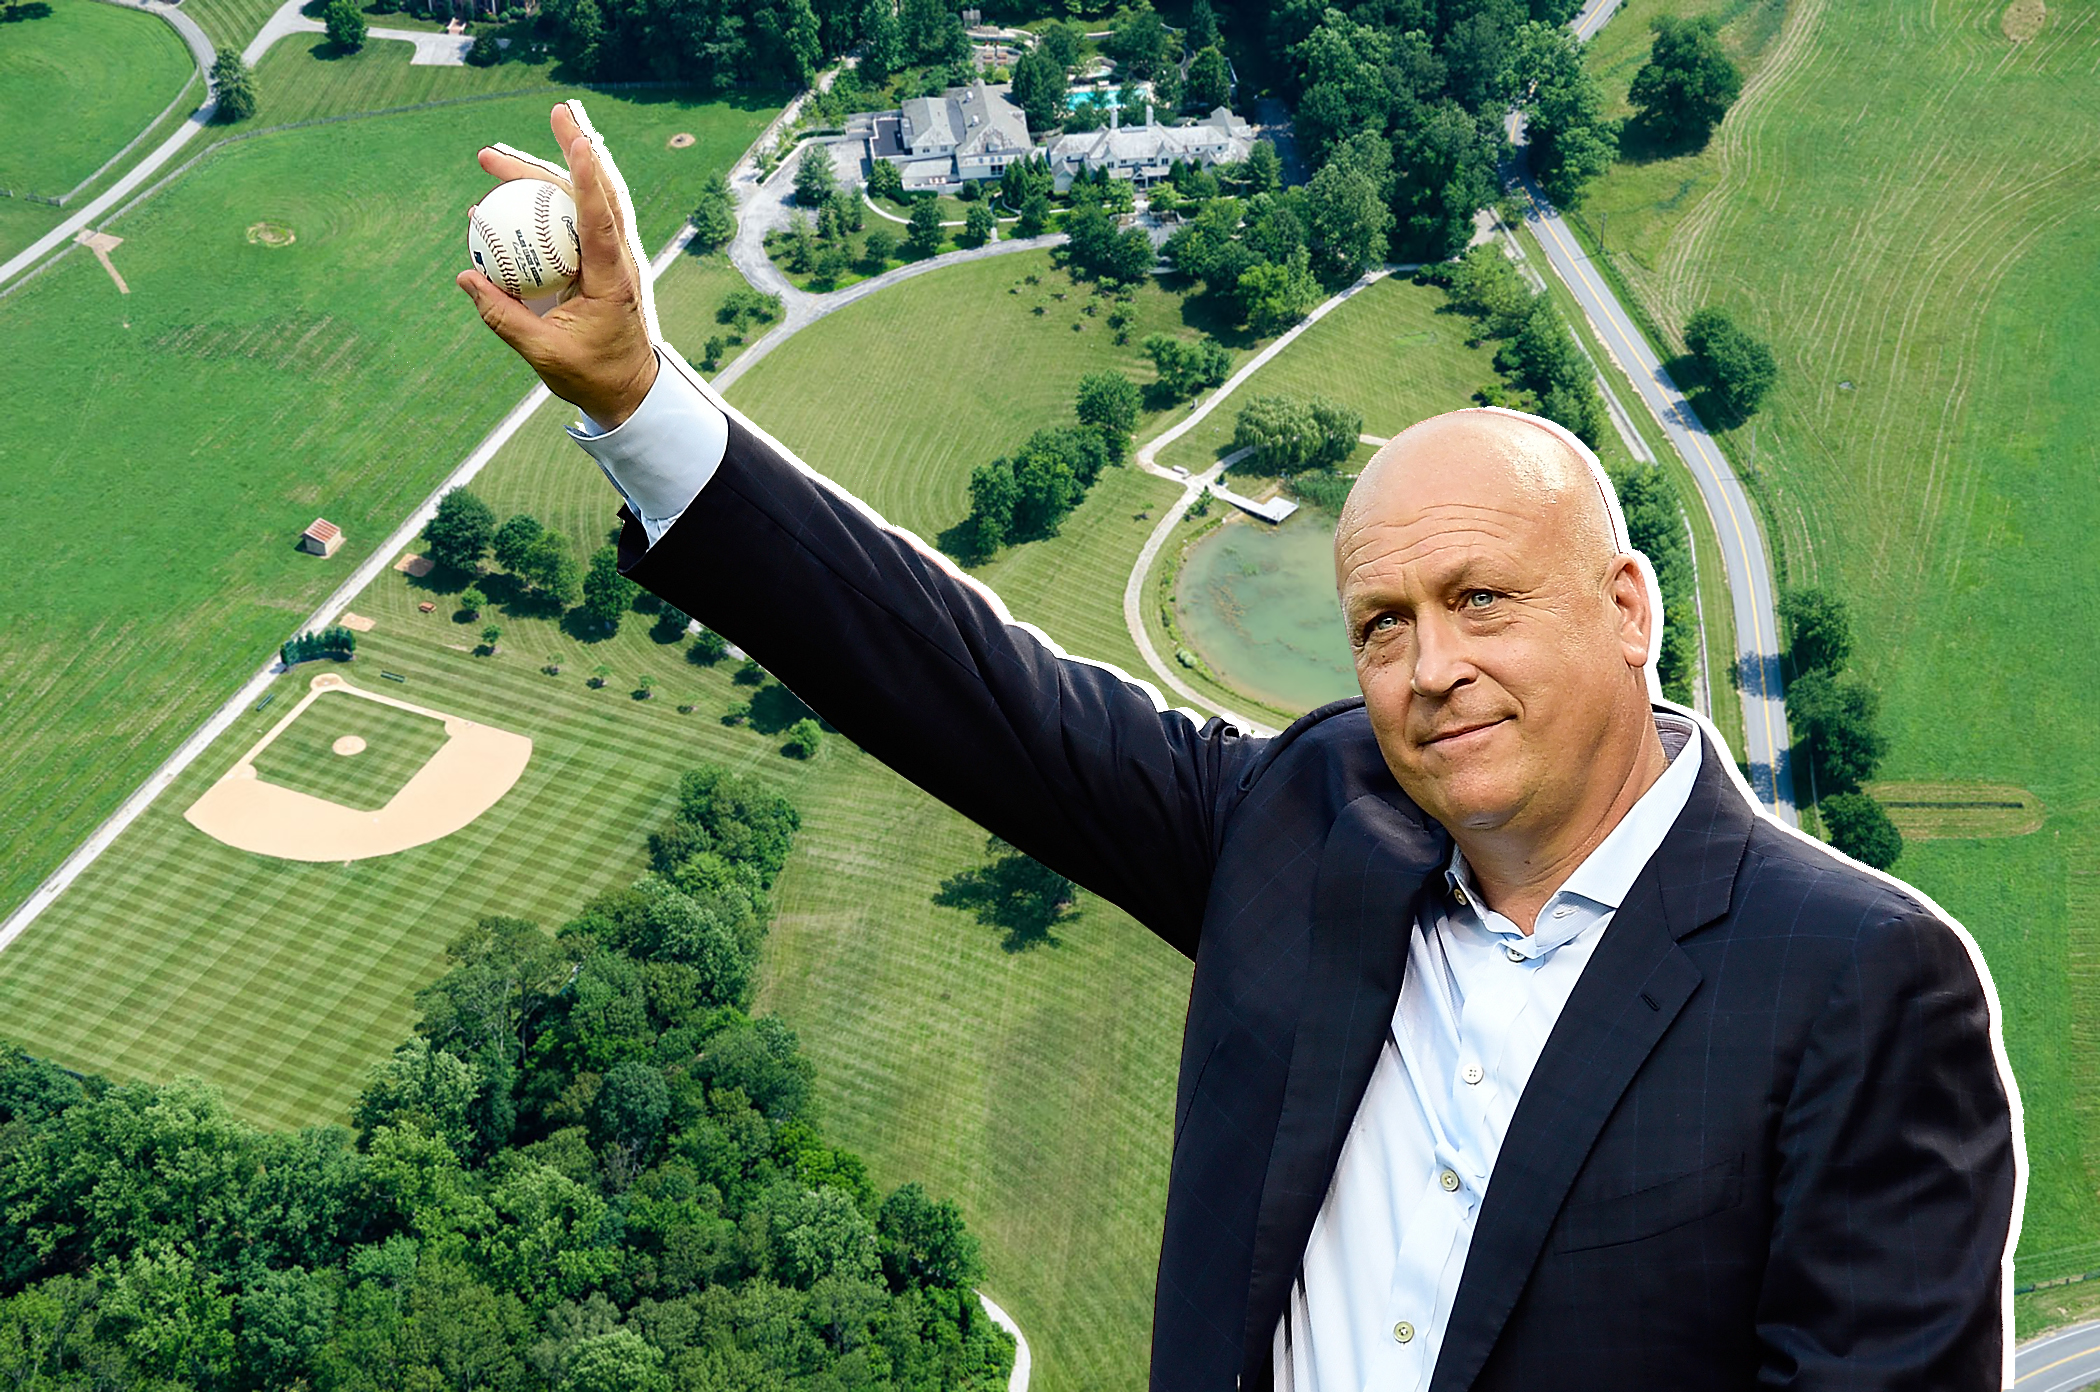 This Baseball Legend Is Auctioning Off His 24-Acre Mansion With Its Own Diamond